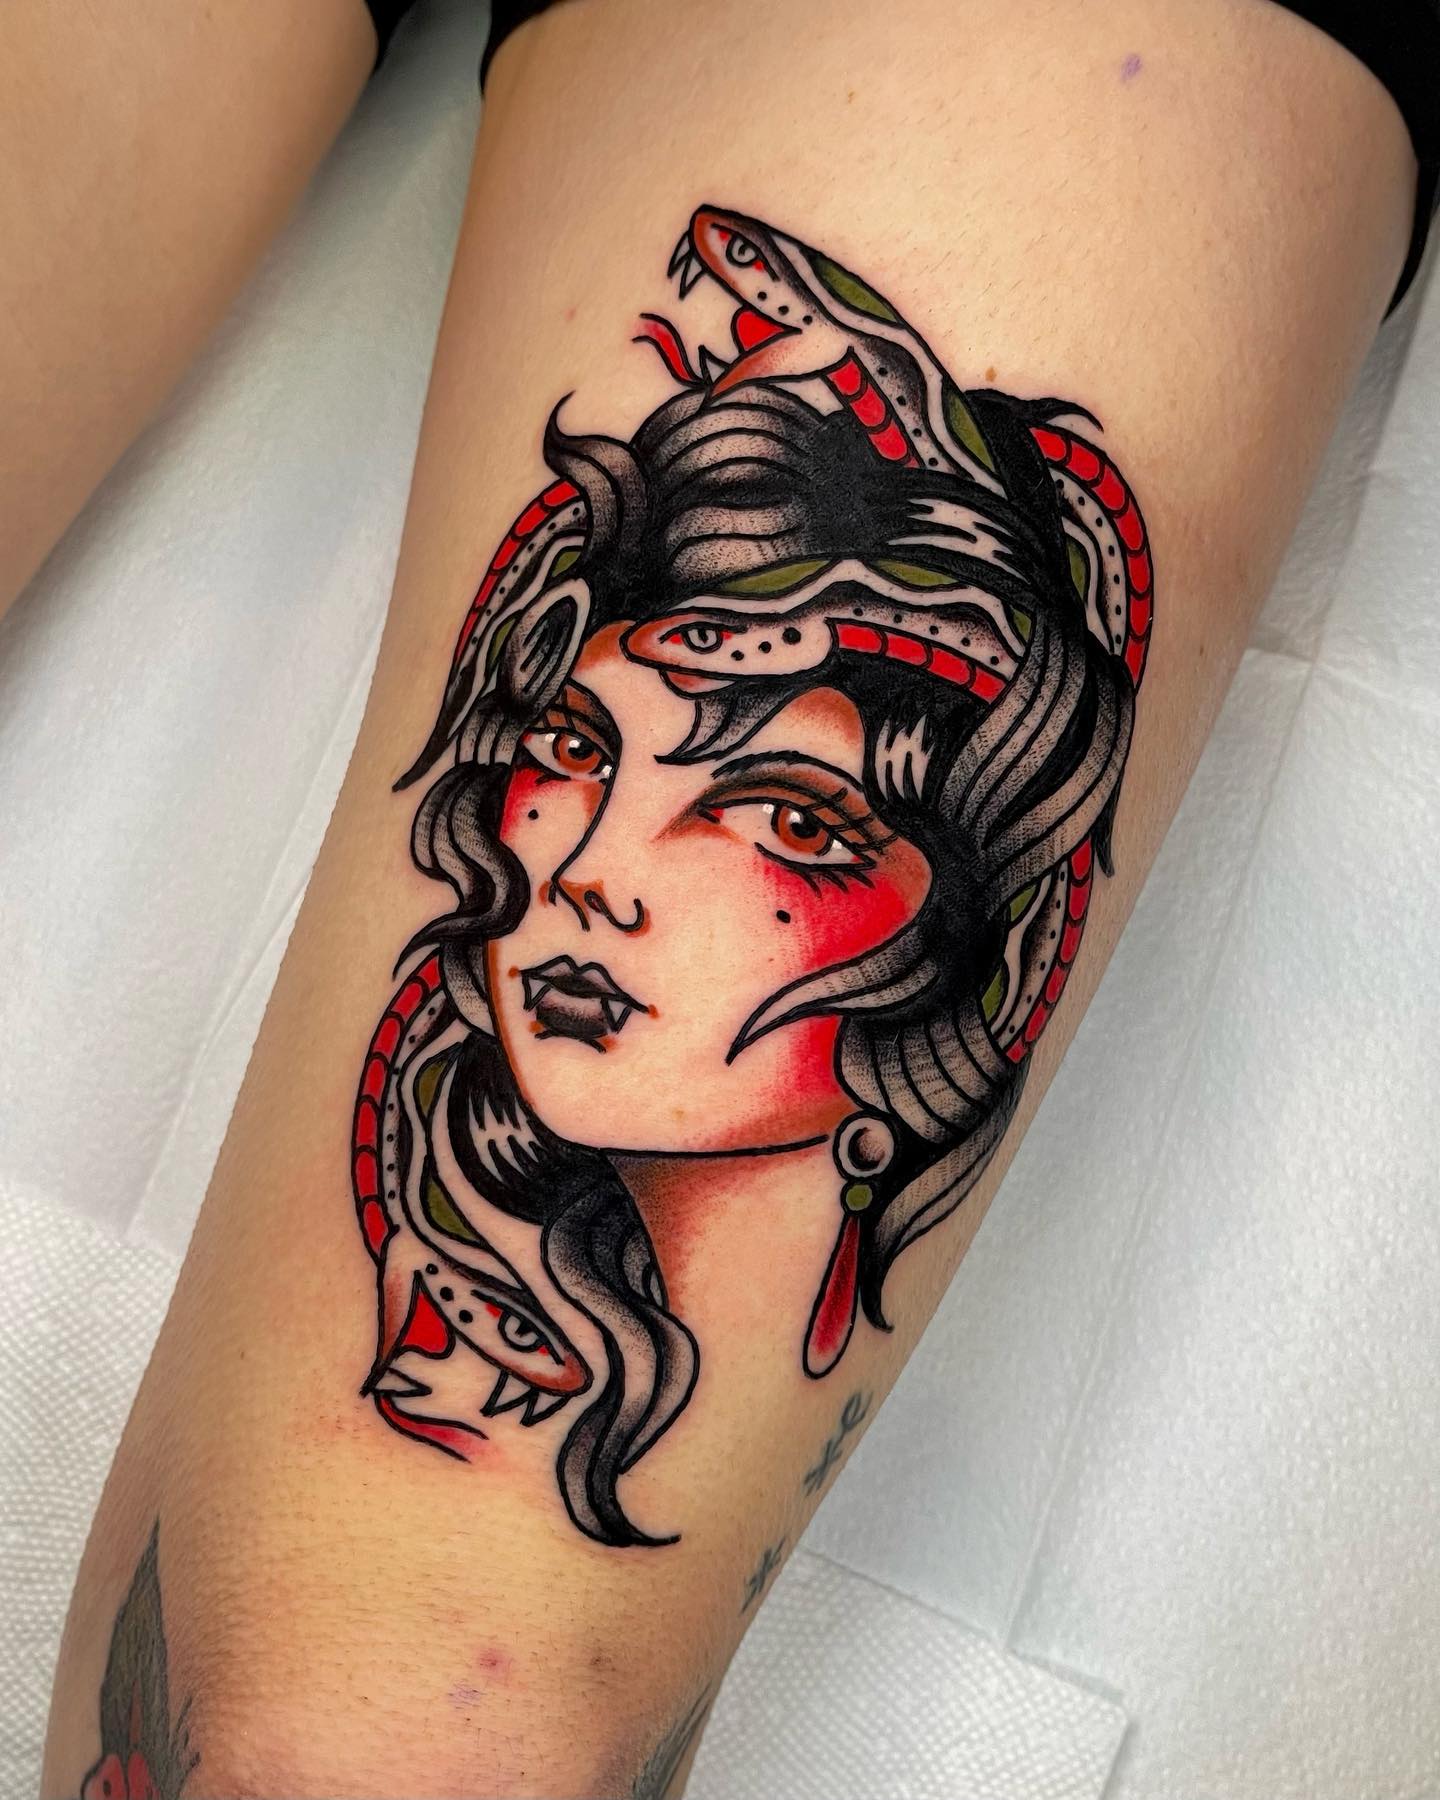 In this traditional Medusa tattoo, she is depicted as evil because of her vampire teeth. One of the meanings of Medusa tattoo is evolving from being considered as something evil to being considered as a survivor. So, let's show this transformation.